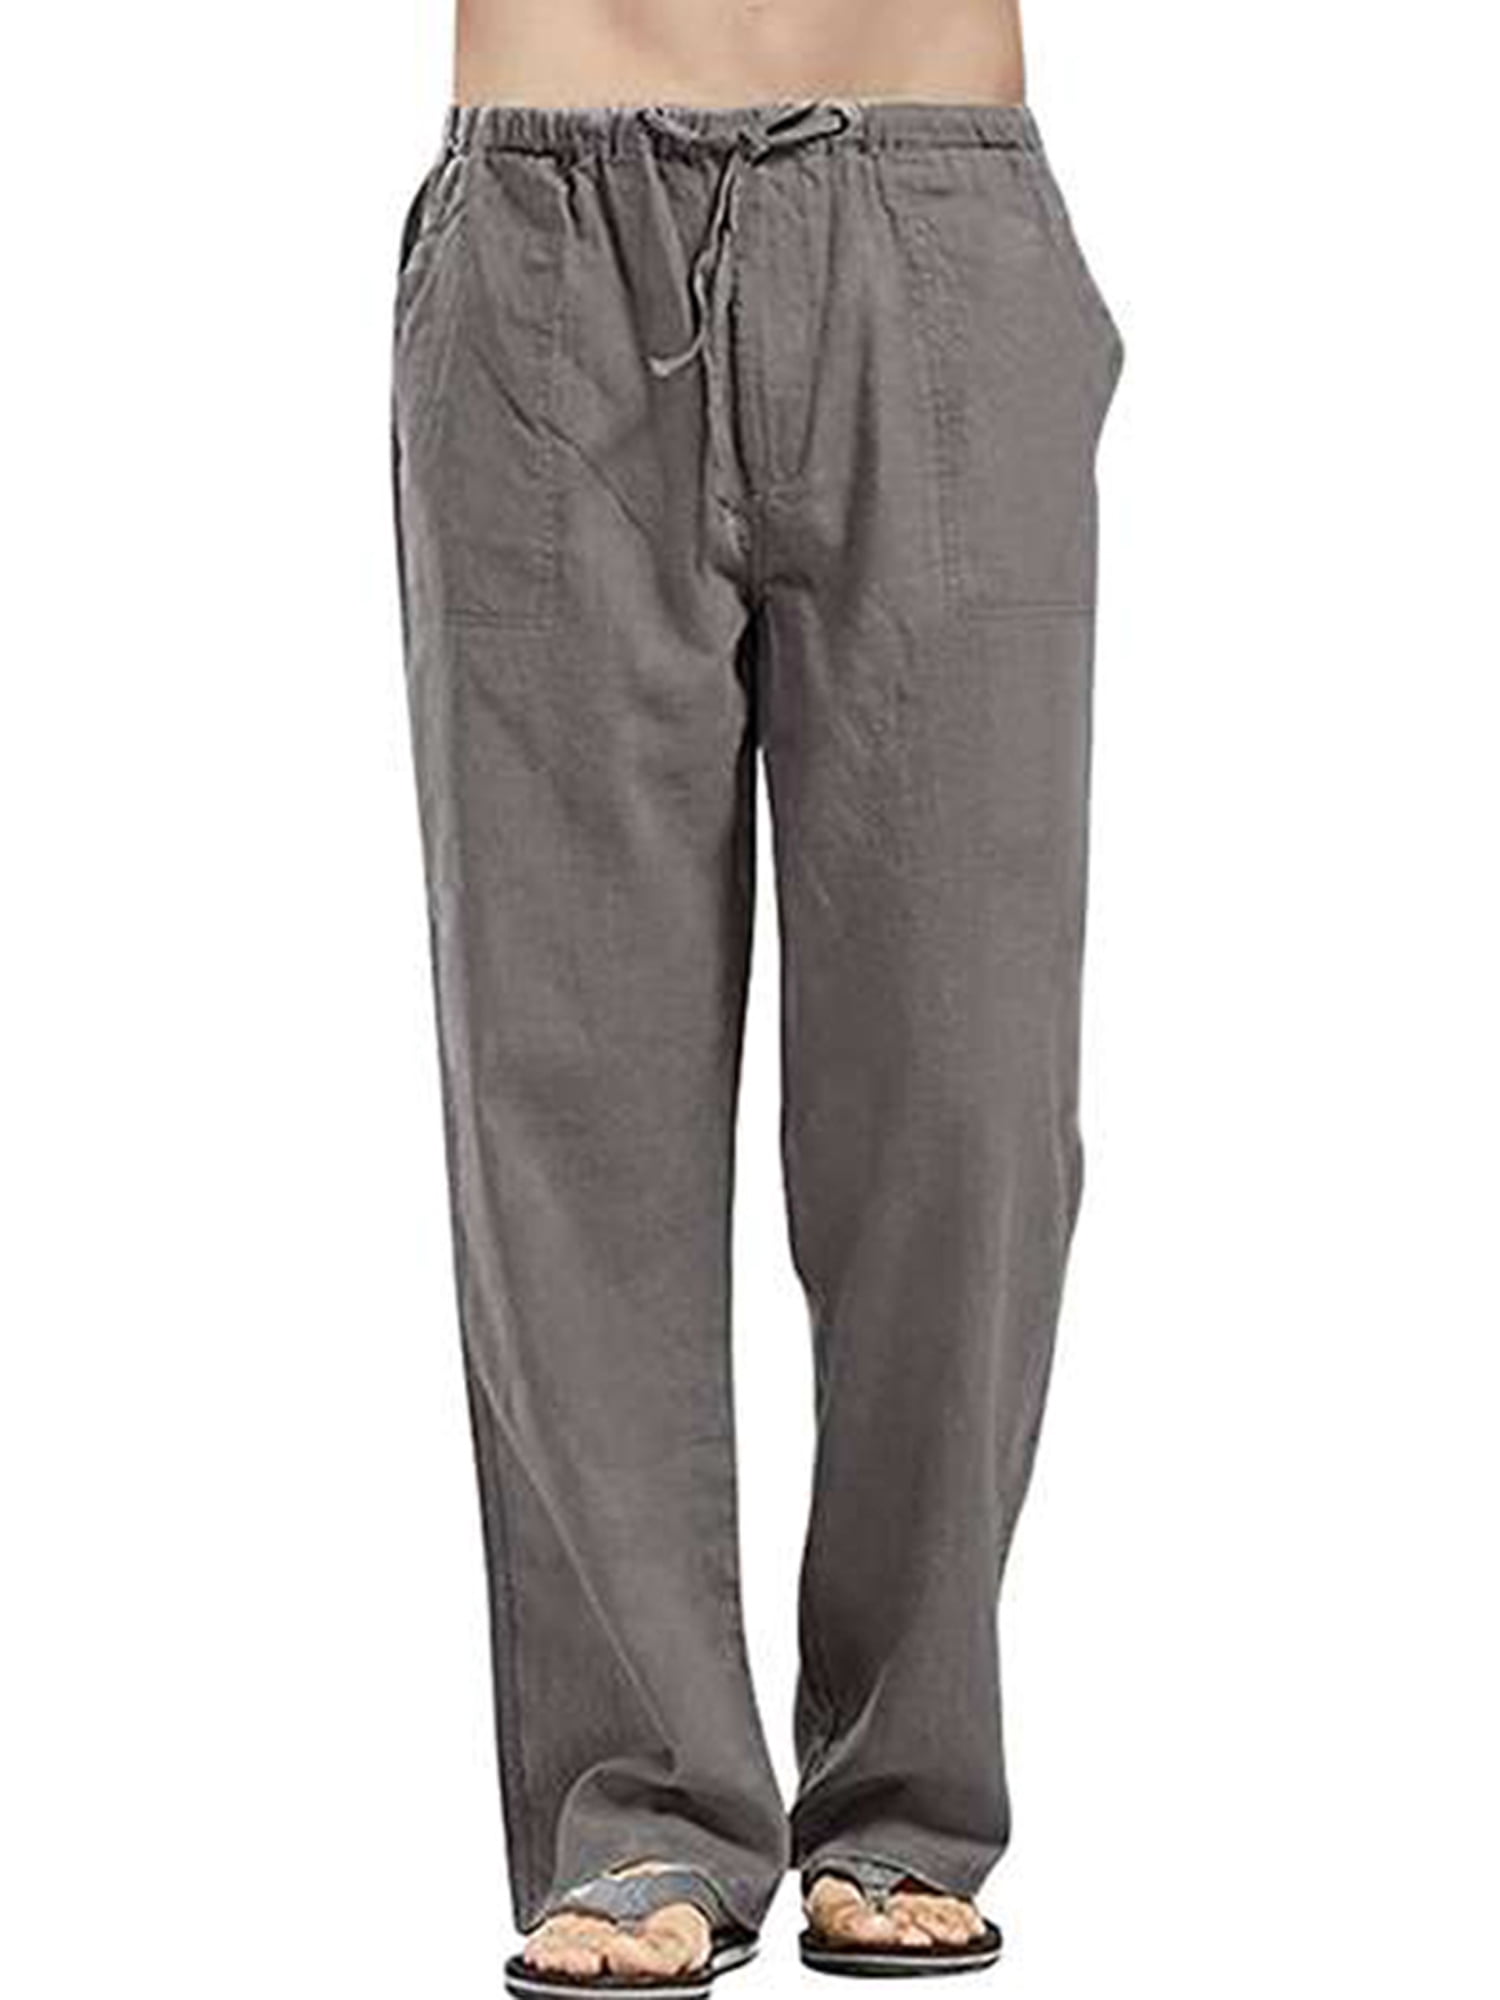 Zimaes-Men Summer Ankle Pant Casual Linen Pants with Drawstring